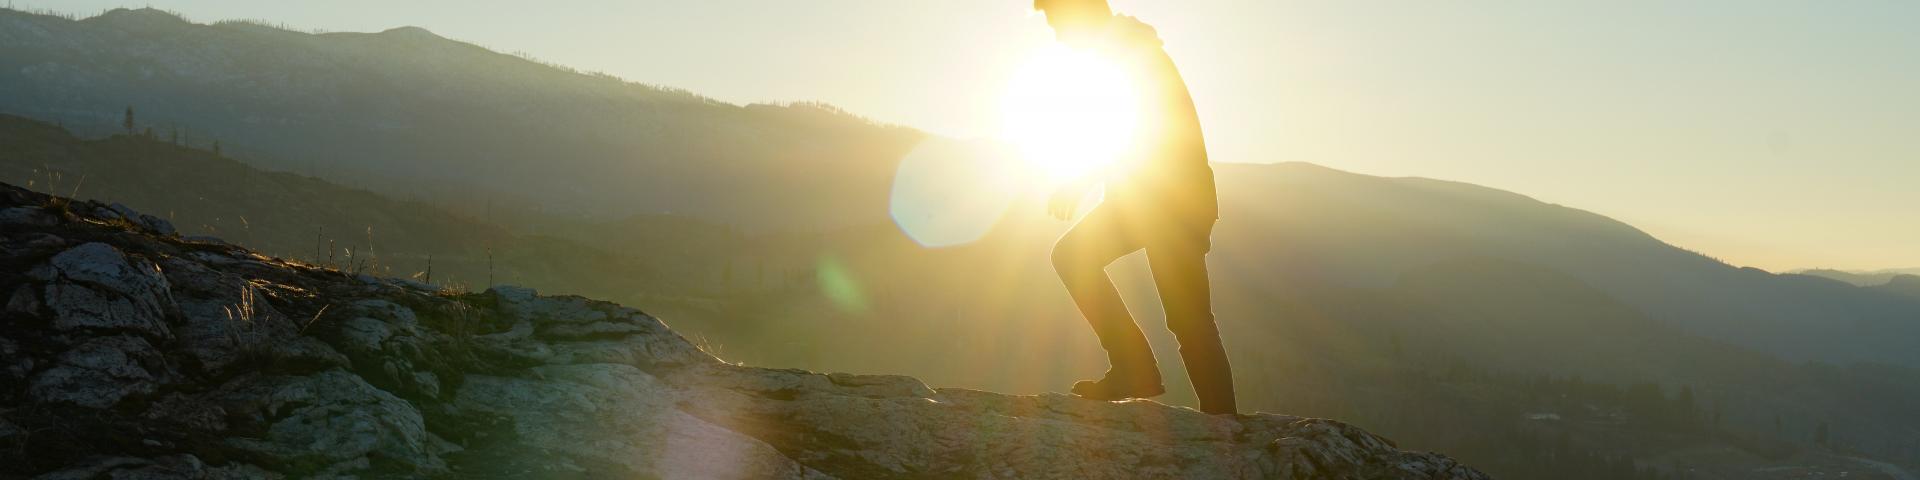 The silhouette of a person climbing on a mountain with the sun in the background 